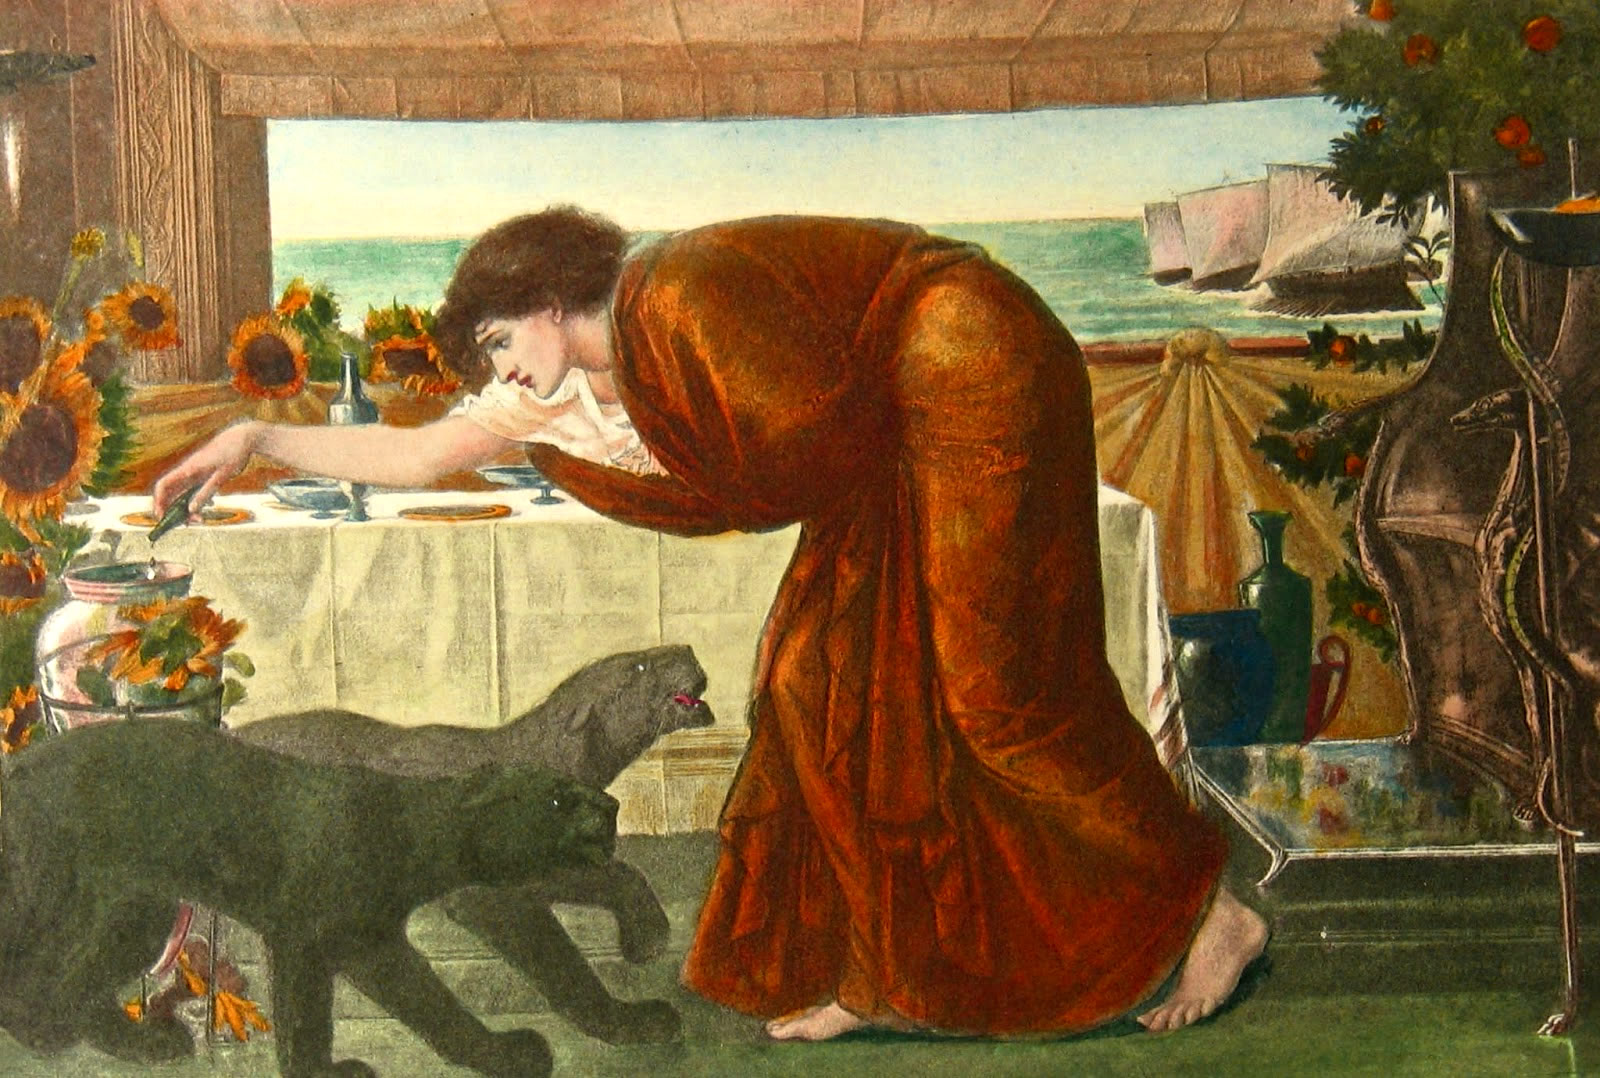 A painting of a woman reaching forward with a small container of liquid pouring into a larger vessel. She is in a decorated room with a table with white cloth. A leopard stands before her feet. The woman is wearing a burnt orange robe.